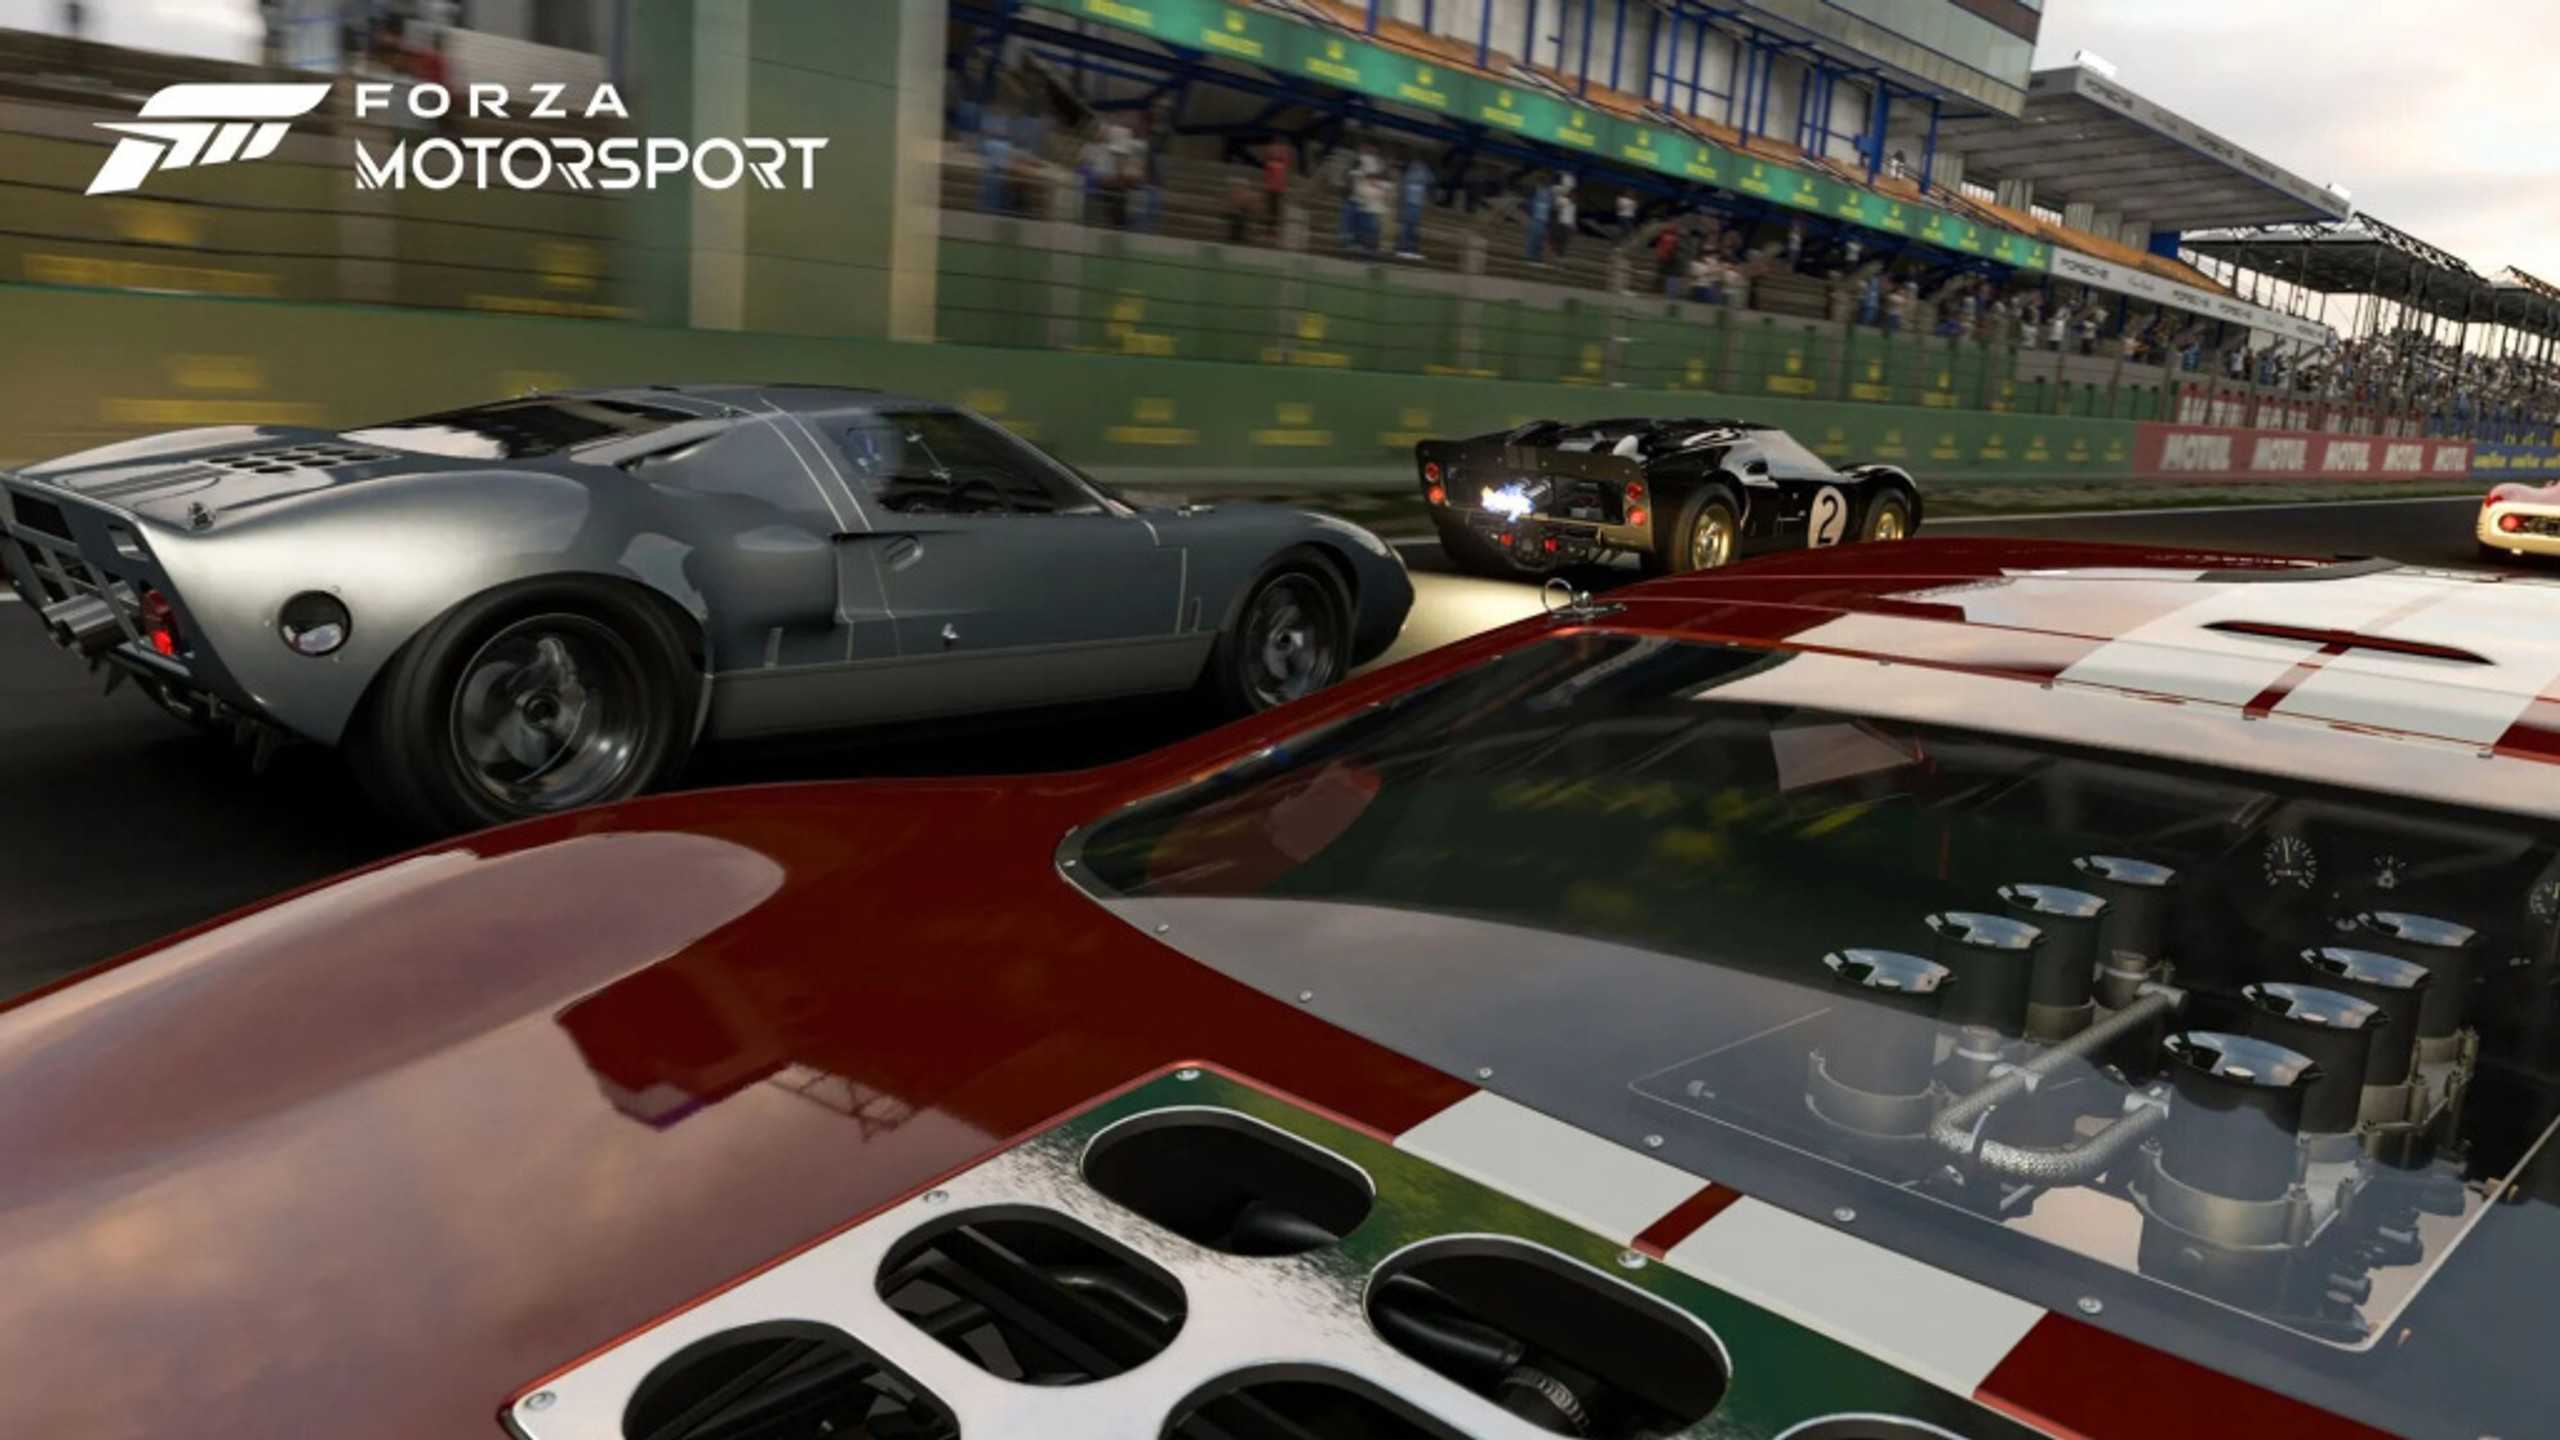 Blind player tries out Forza Motorsport's Blind Drive Assist feature, wins  a race using it